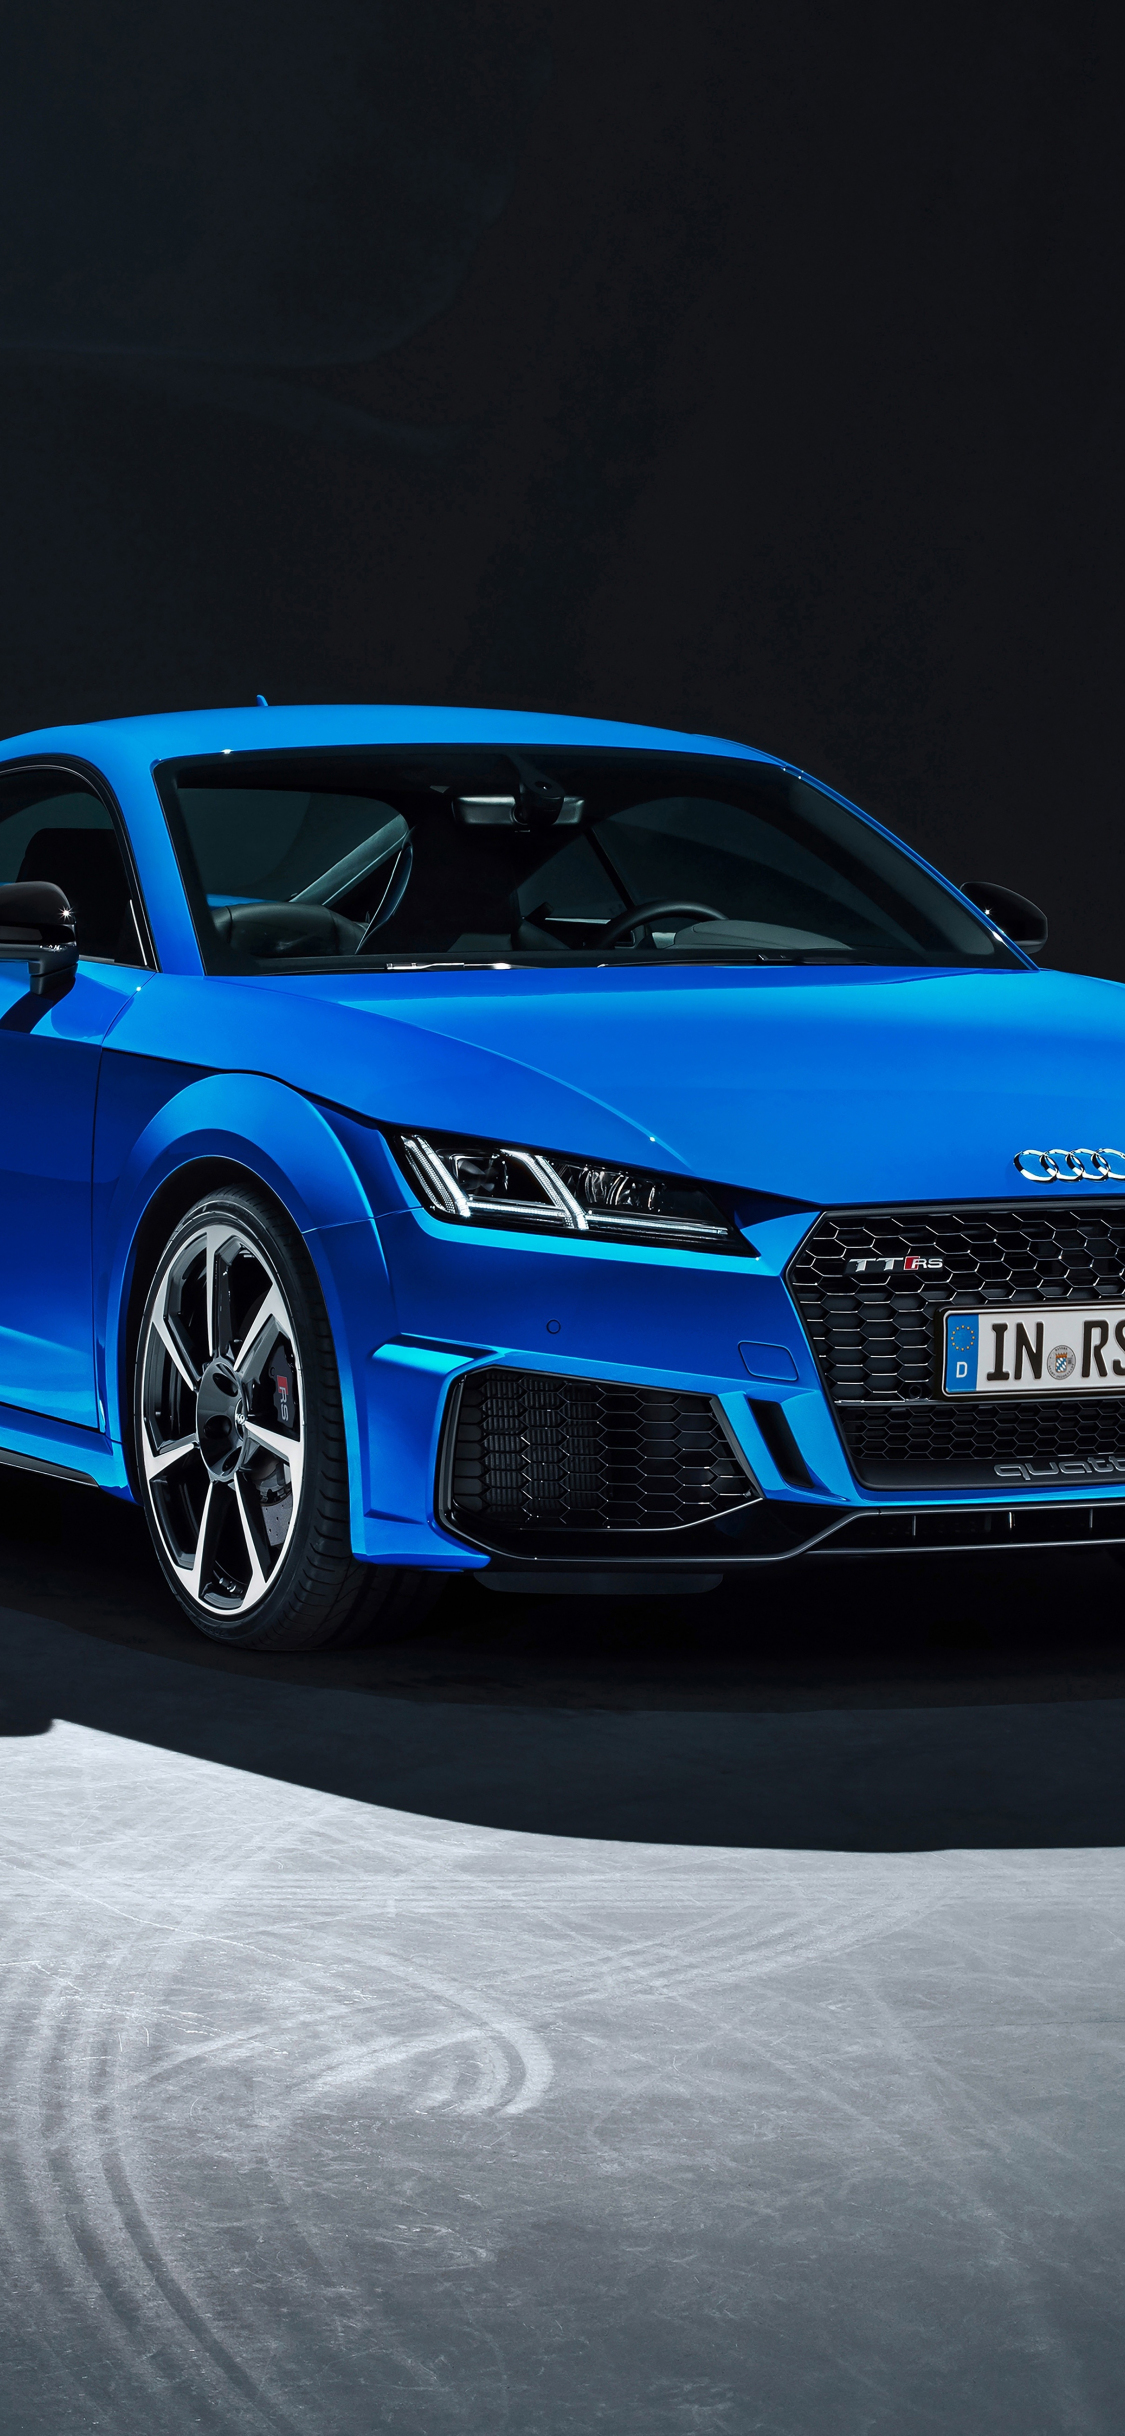 Download wallpaper 1125x2436 audi tt-rs coupe, blue, sports car, iphone x,  1125x2436 hd background, 19005